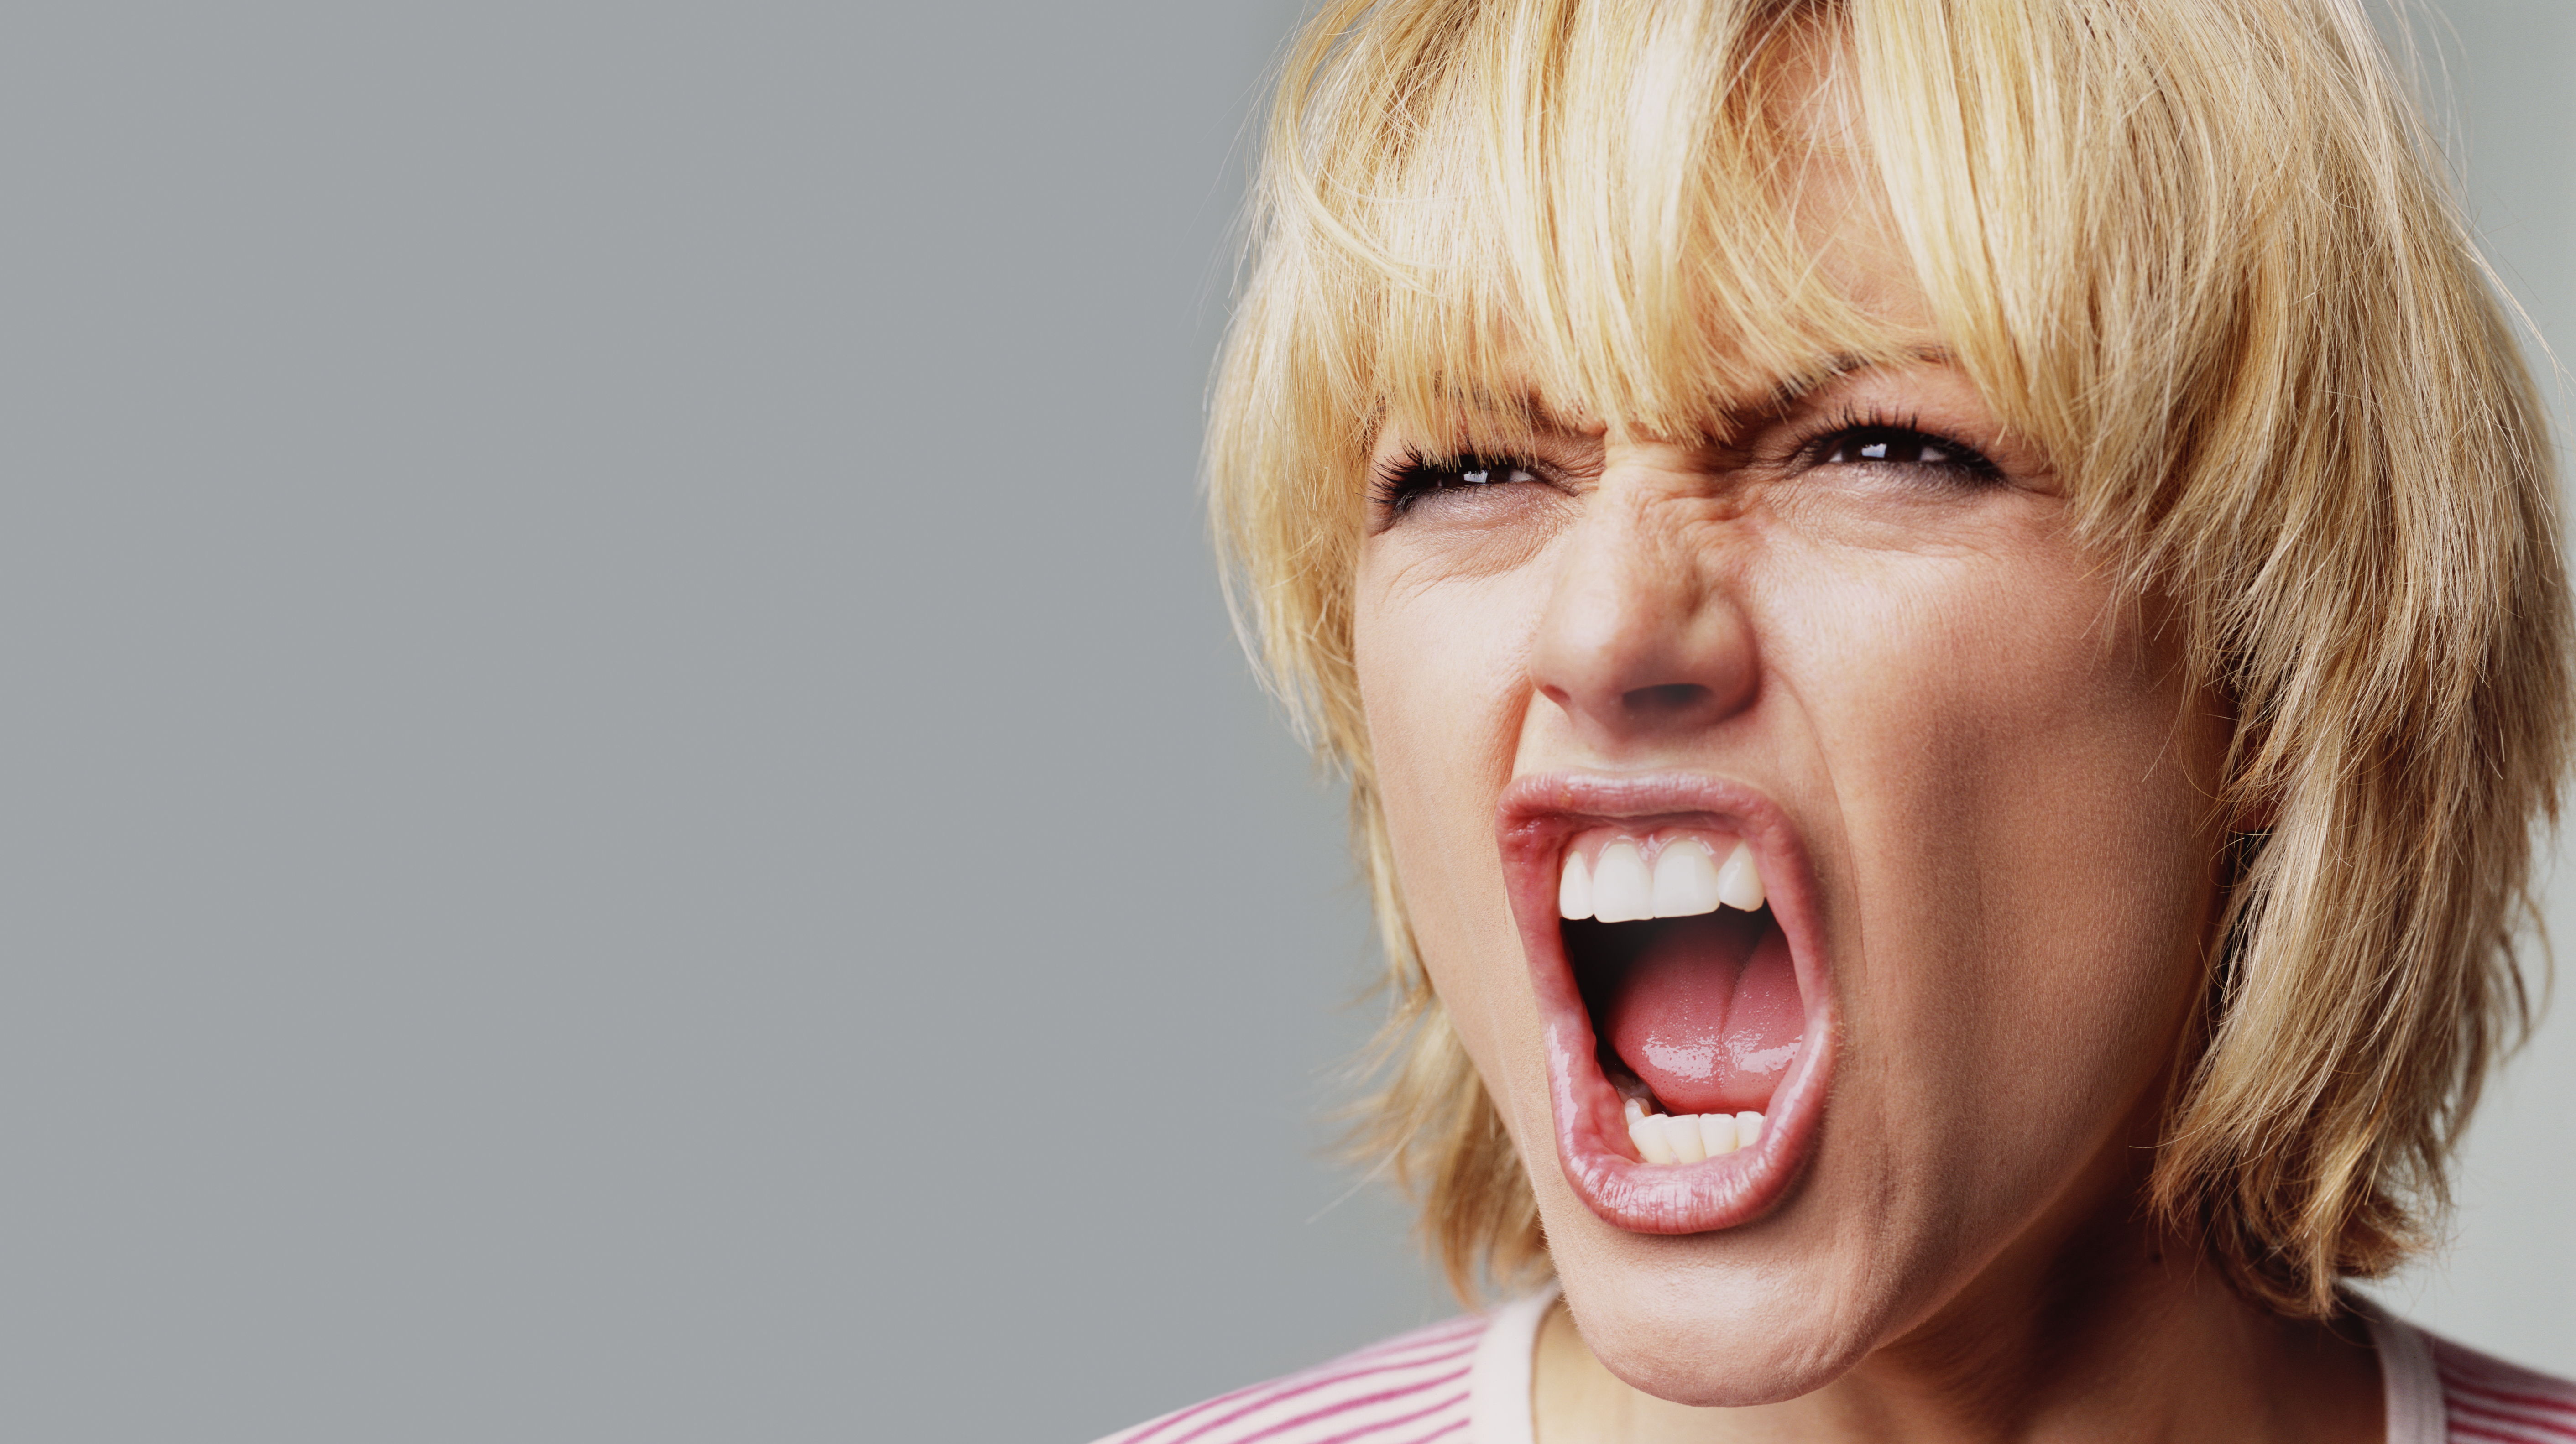 An angry woman shouting in rage | Source: Getty Images